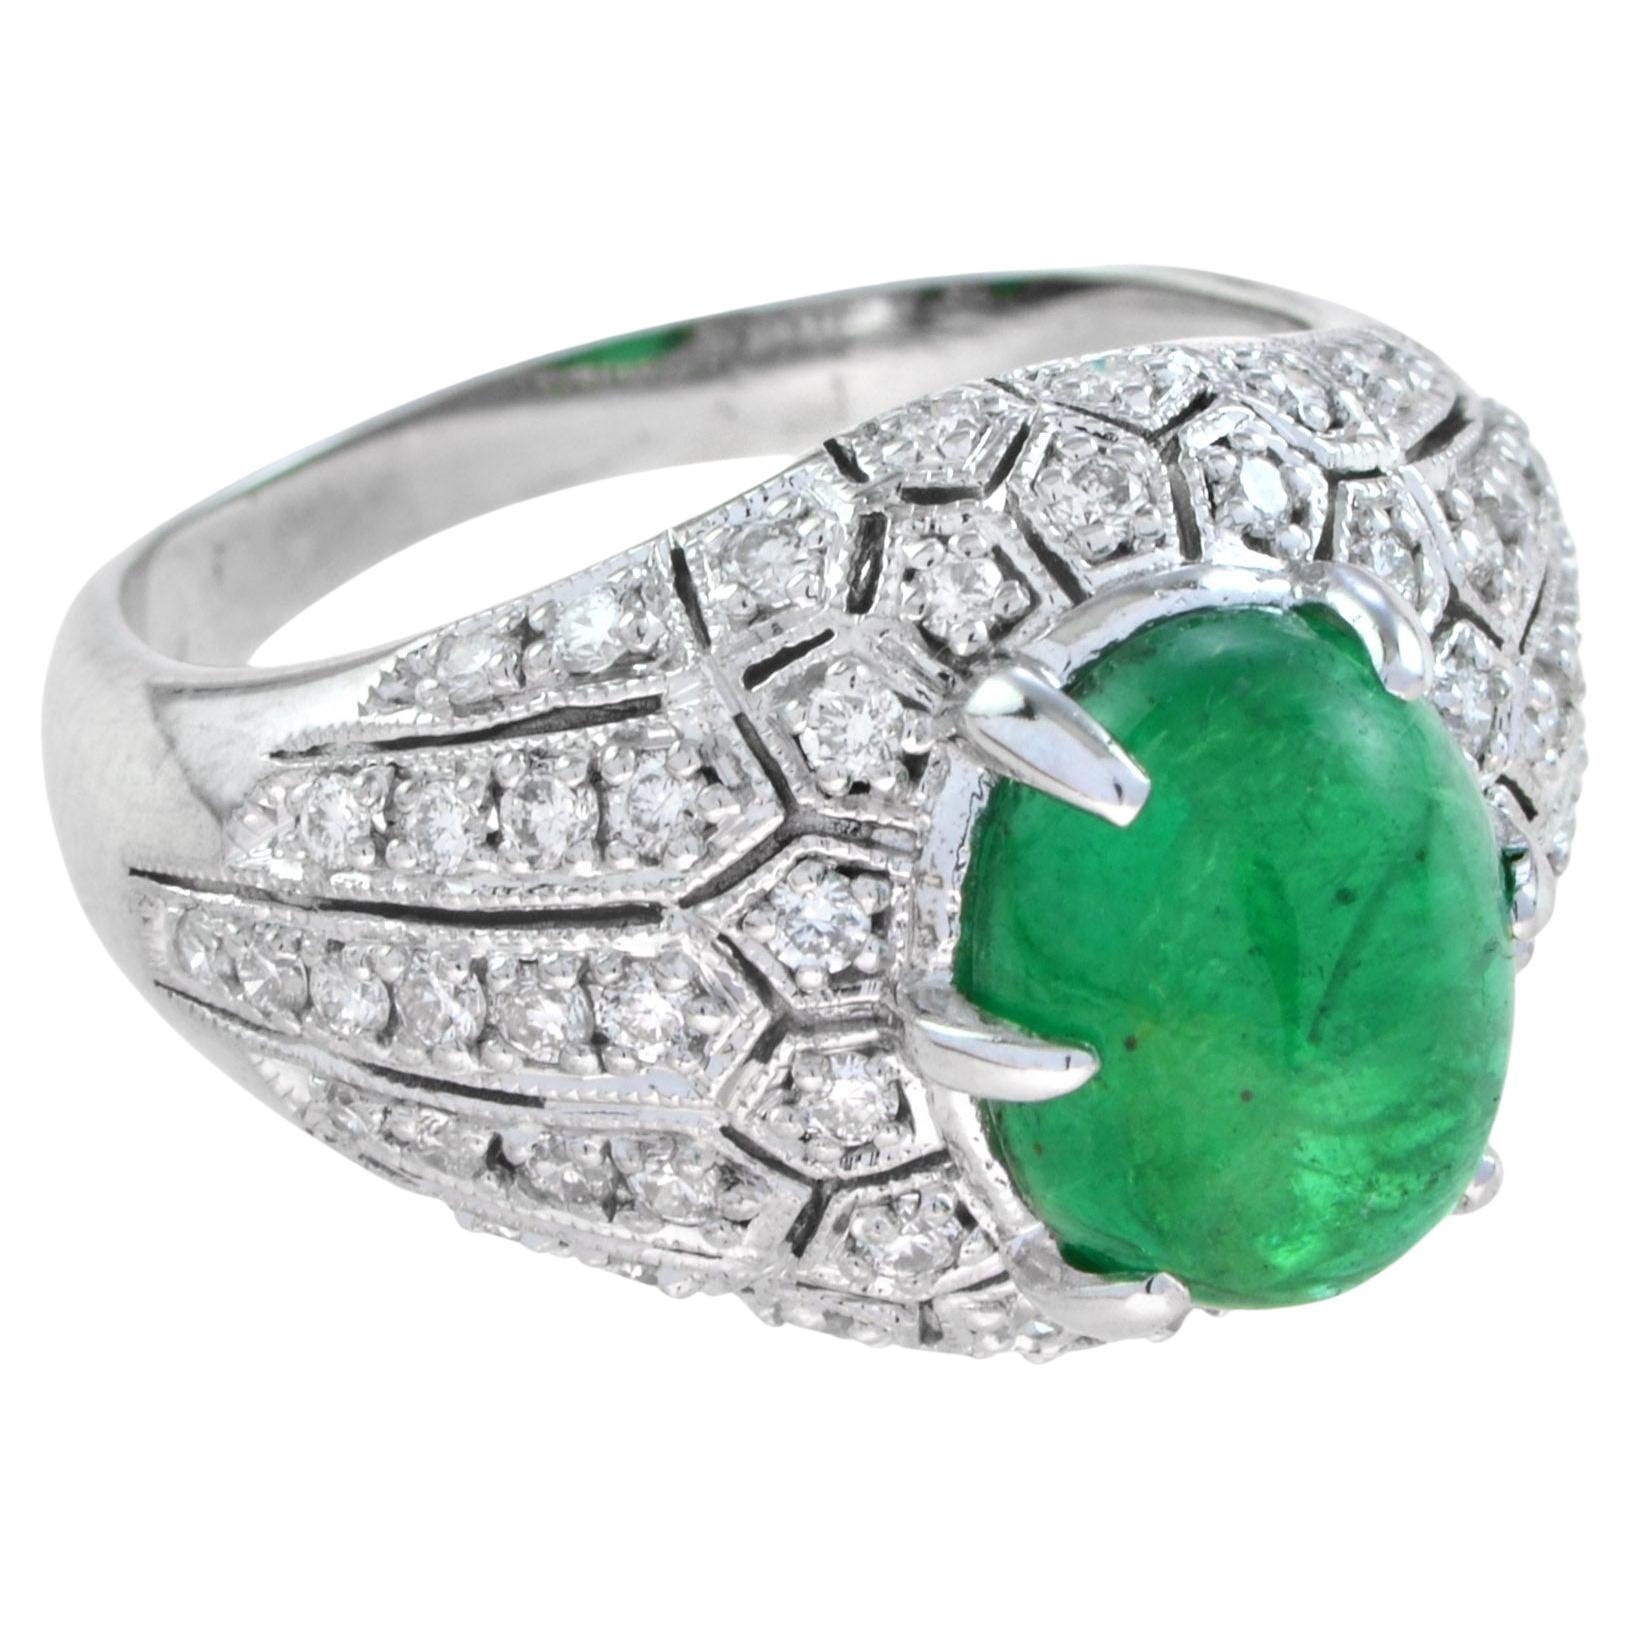 This emerald and diamond ring is a bold and scintillating statement. In the very center, an cabochon absinthe green emerald of incredibly vibrant hue sits perched above the shimmering diamond backdrop. Ready to wear from day to evening with style